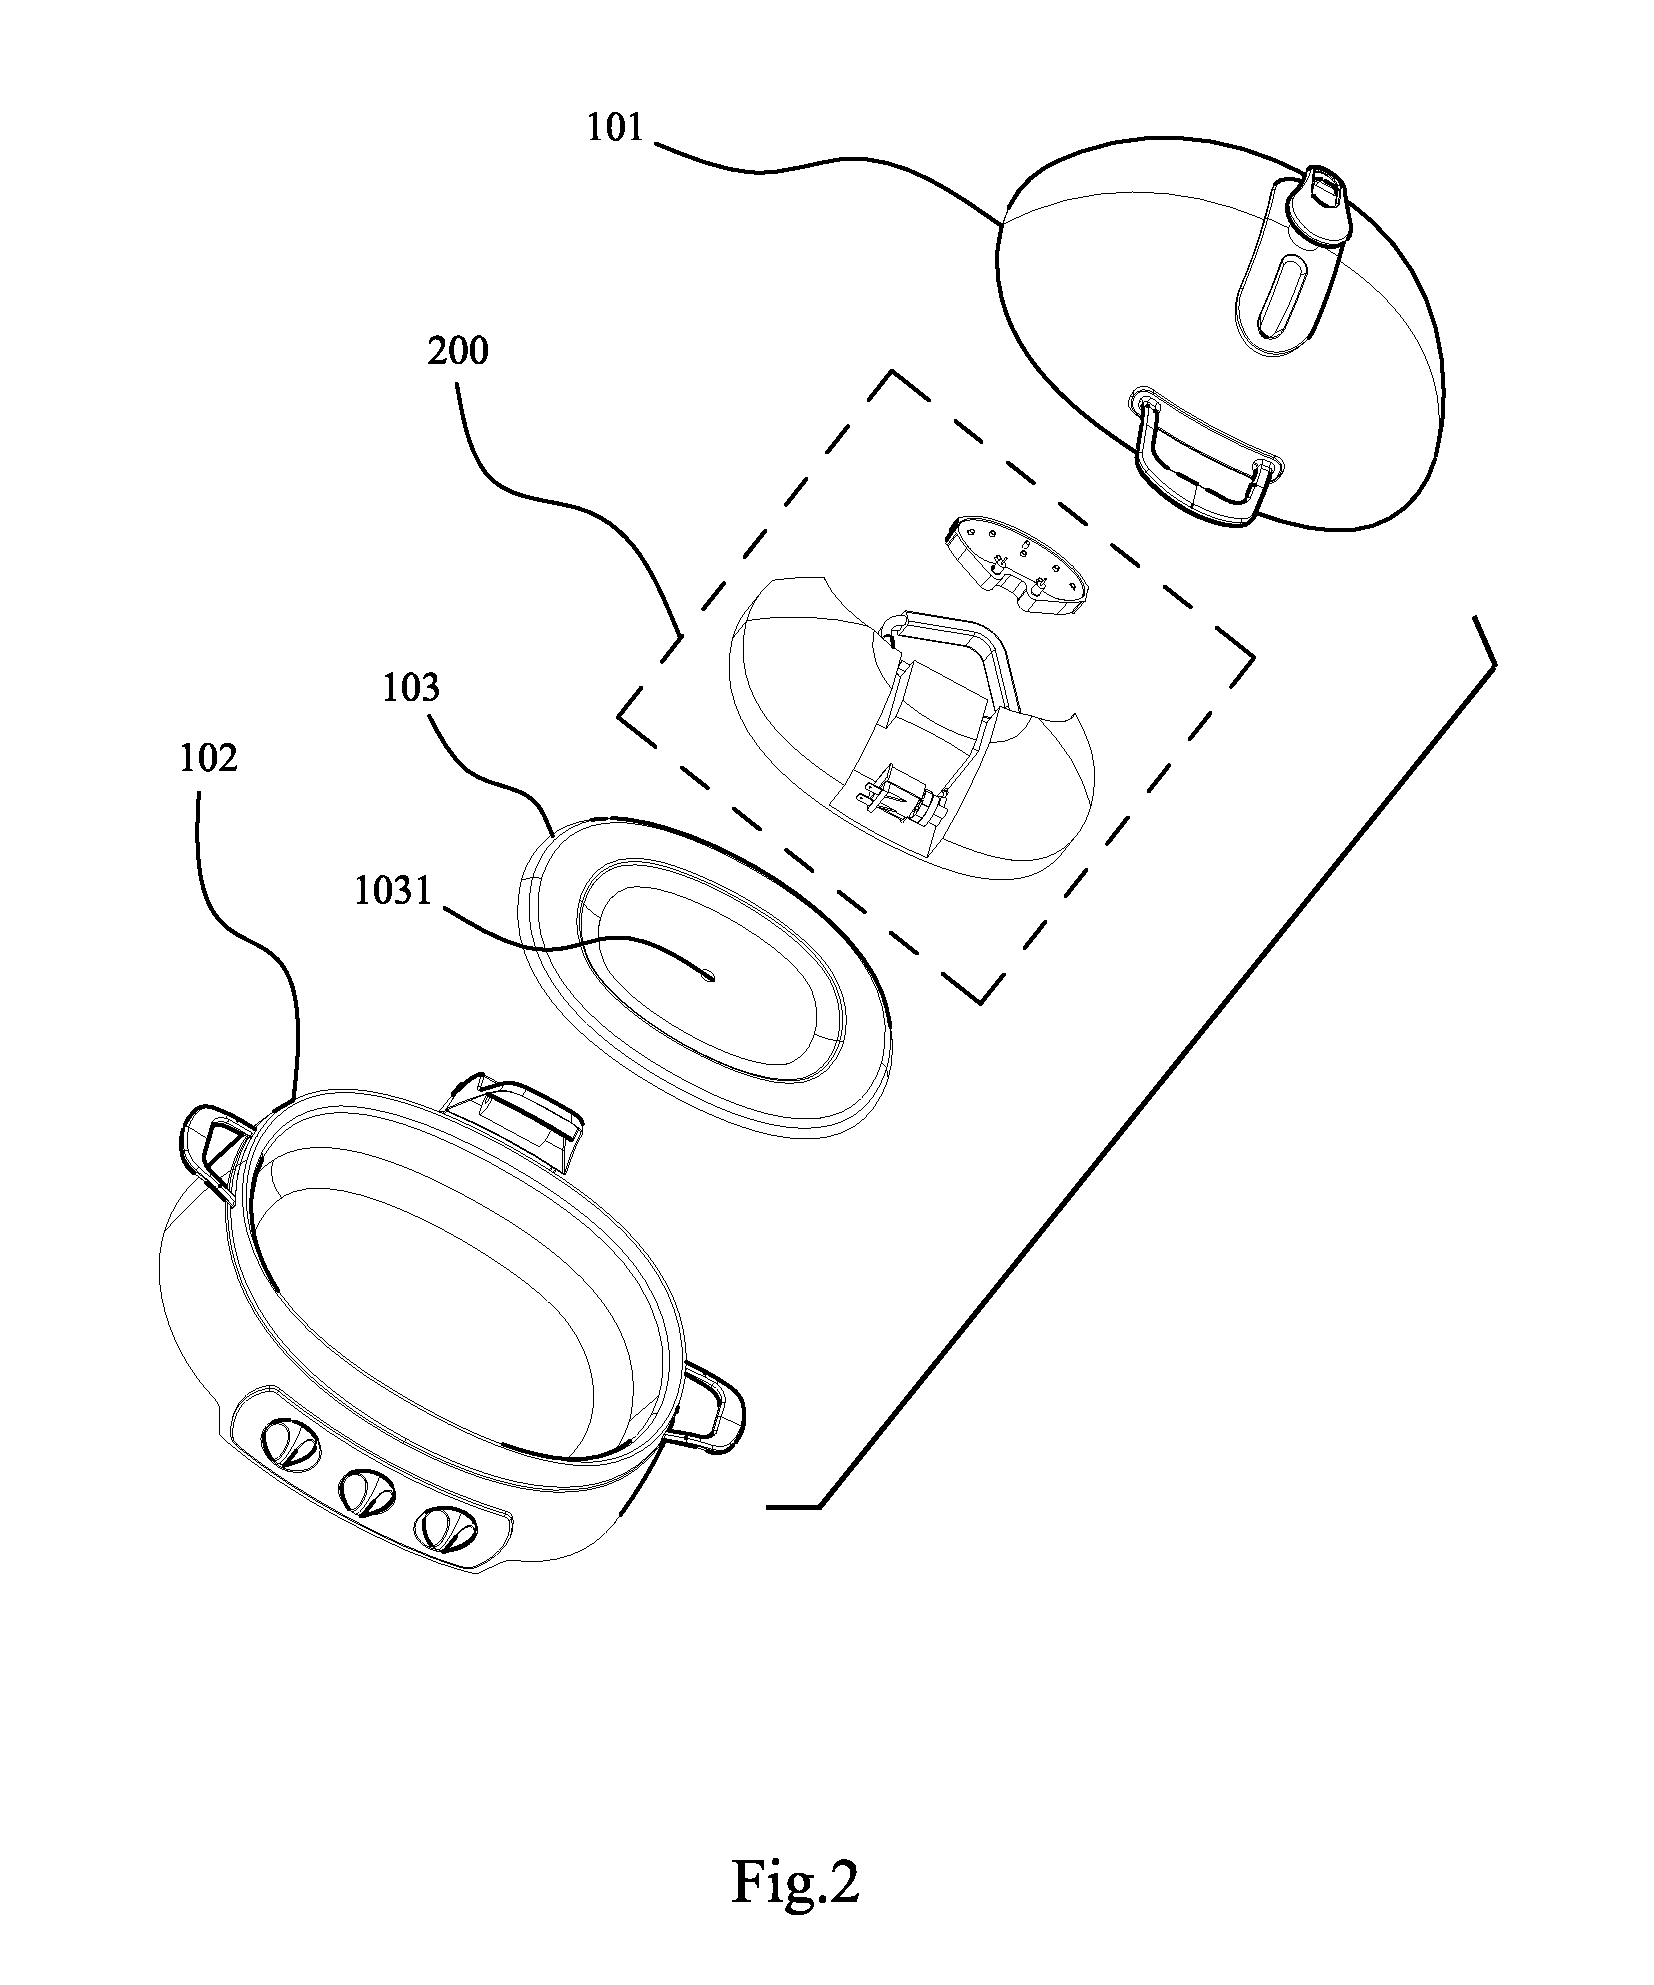 Grilling device